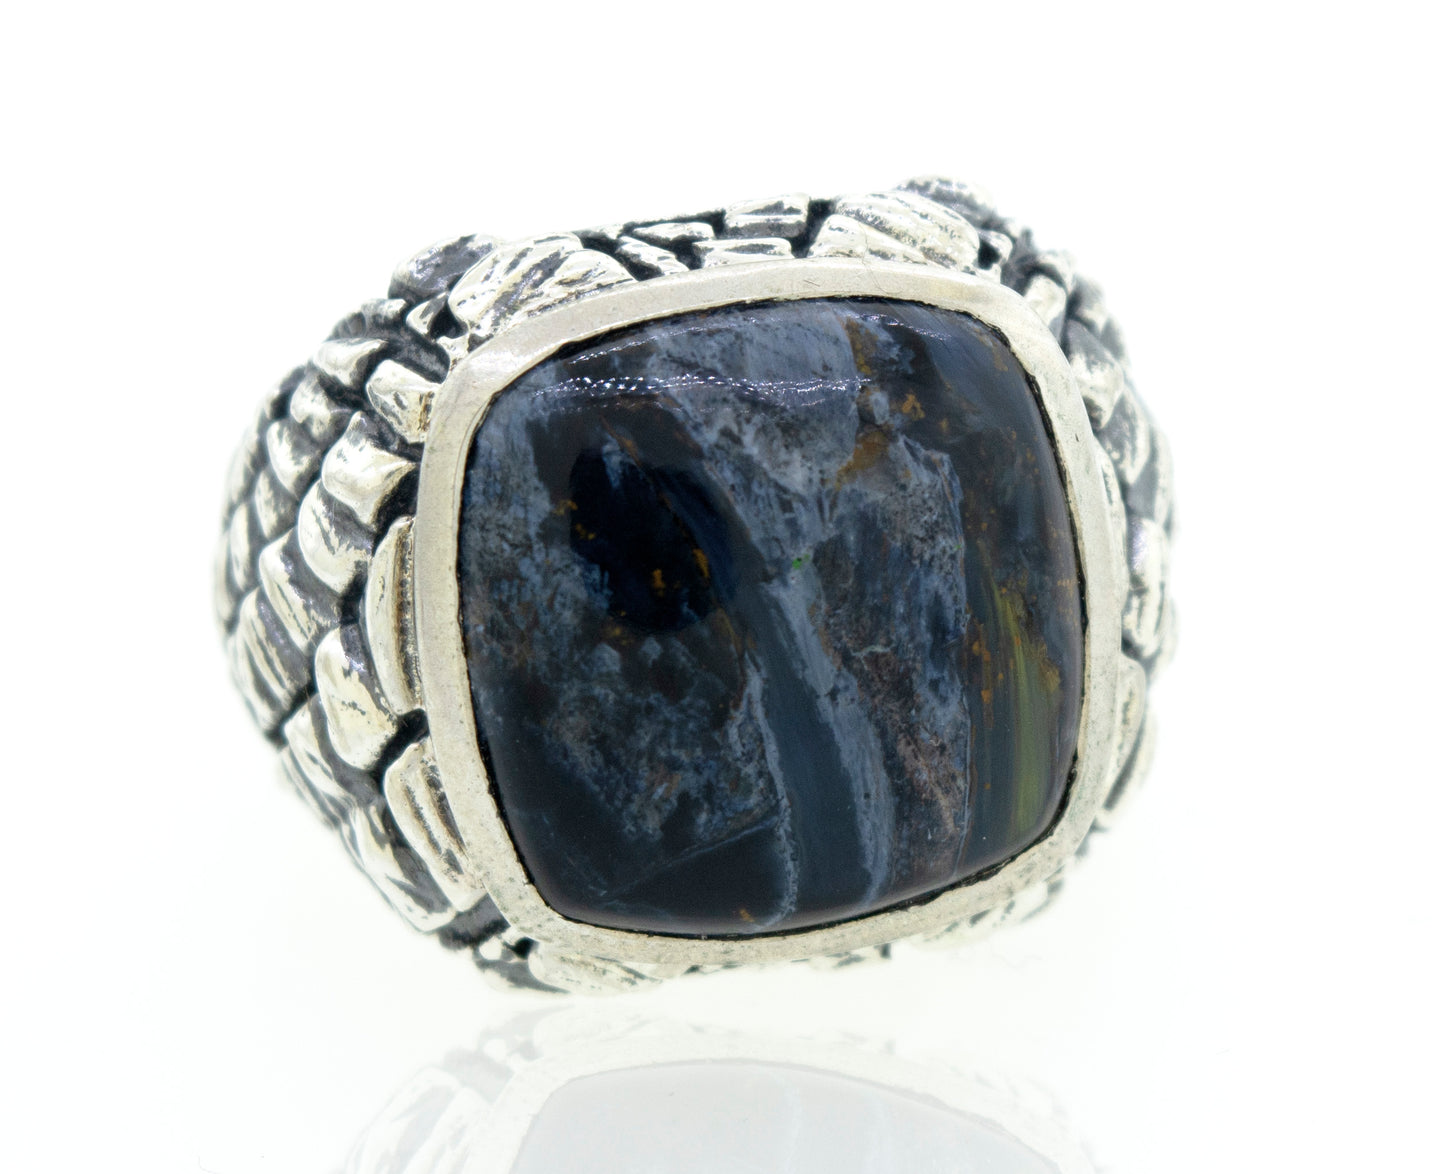 A Pietersite Signet Ring featuring a statement black stone.